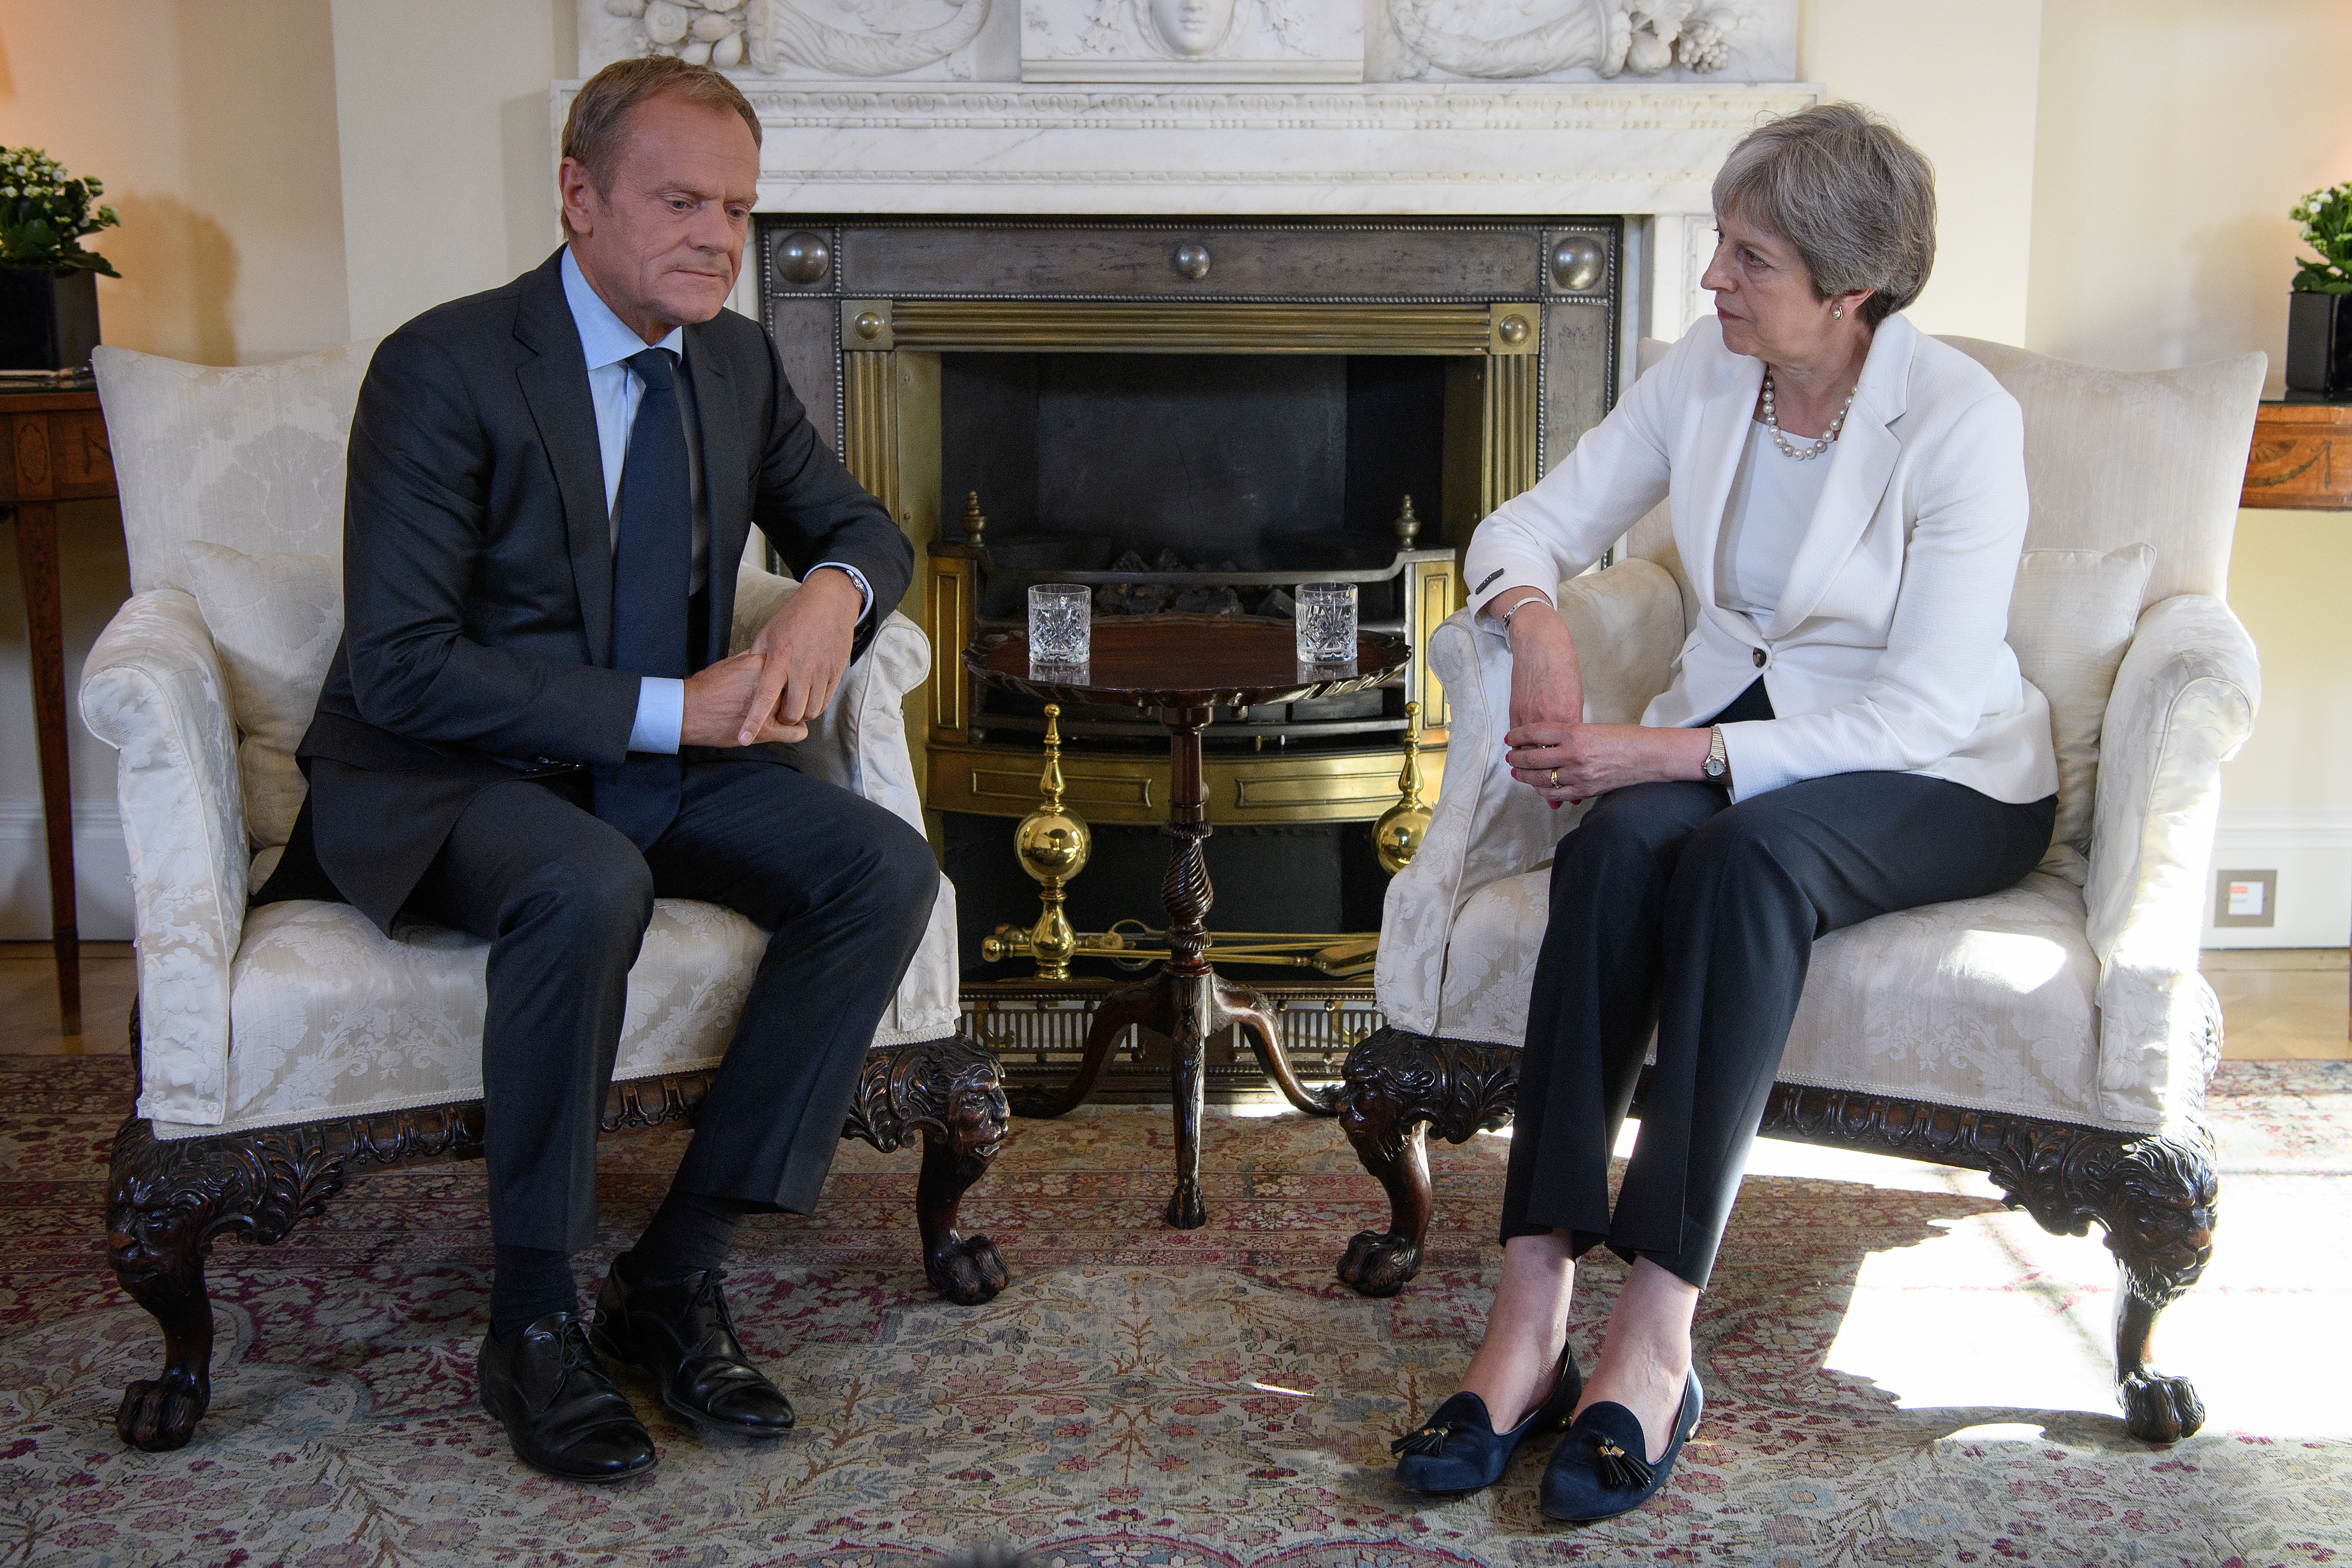 Theresa May meets with President of the European Council Donald Tusk during bilateral talks